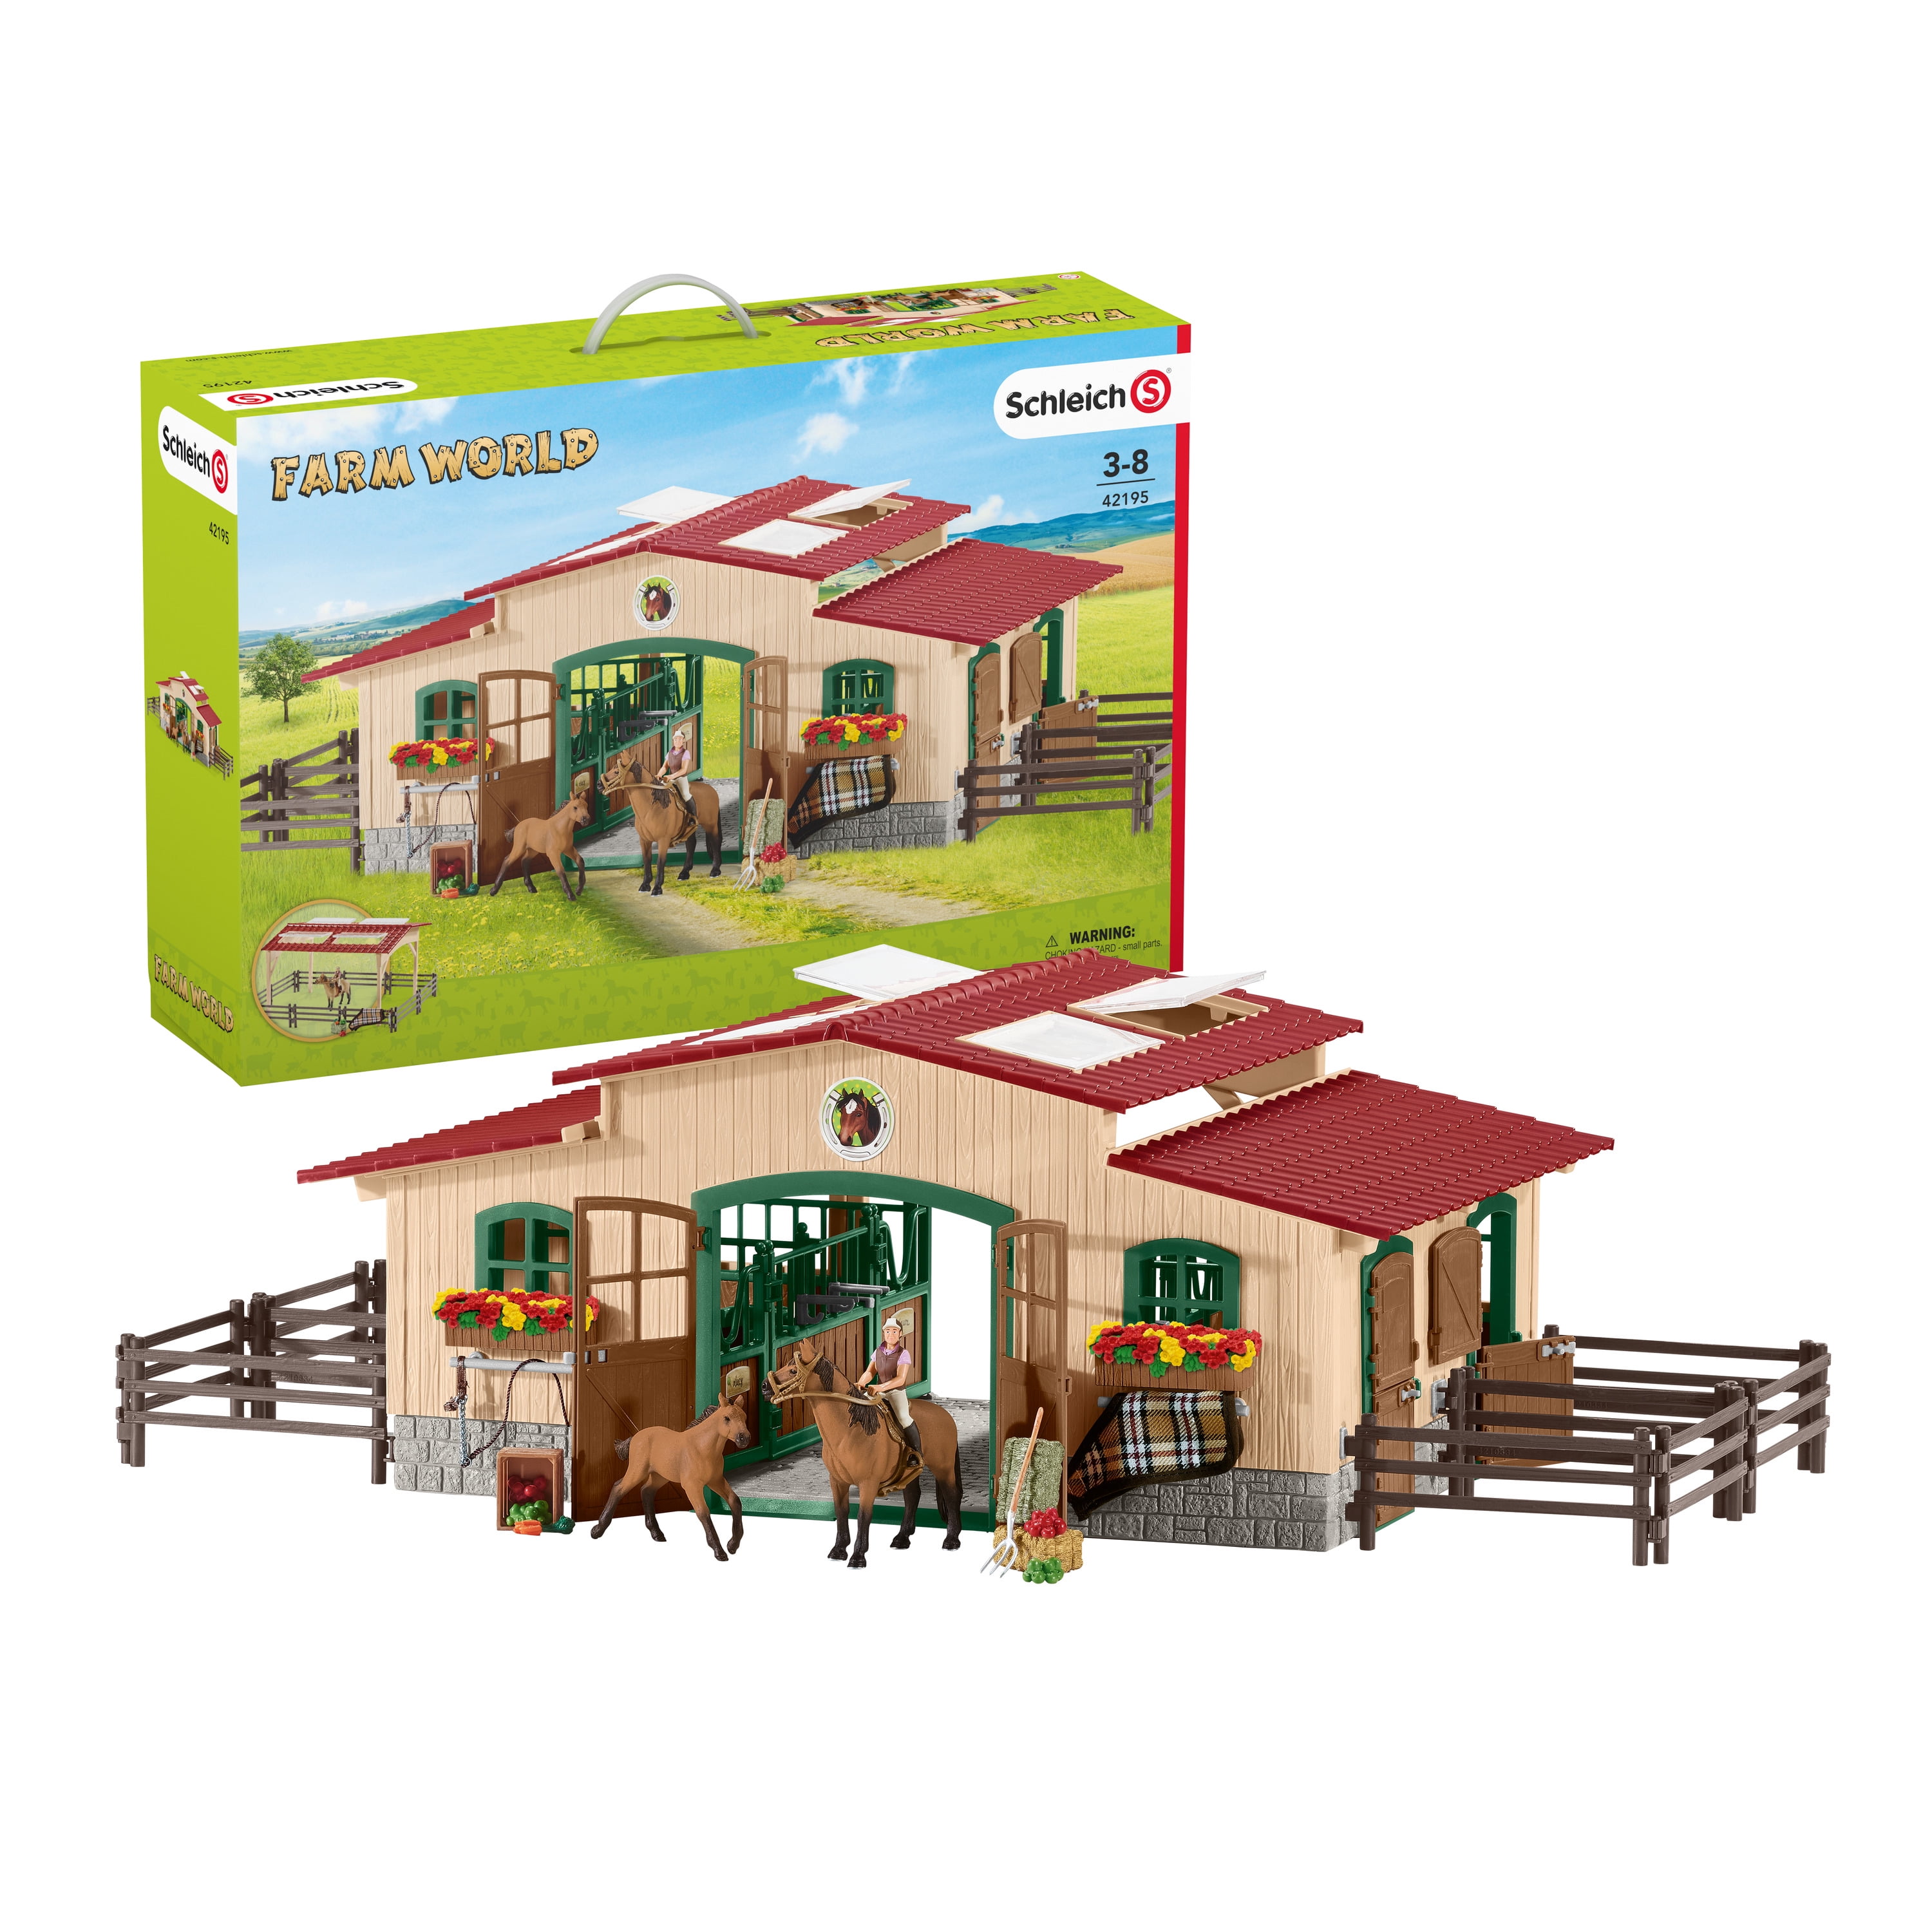 Lower Barn Door Schleich Farm World Horse Stable Replacement Parts and Pieces 